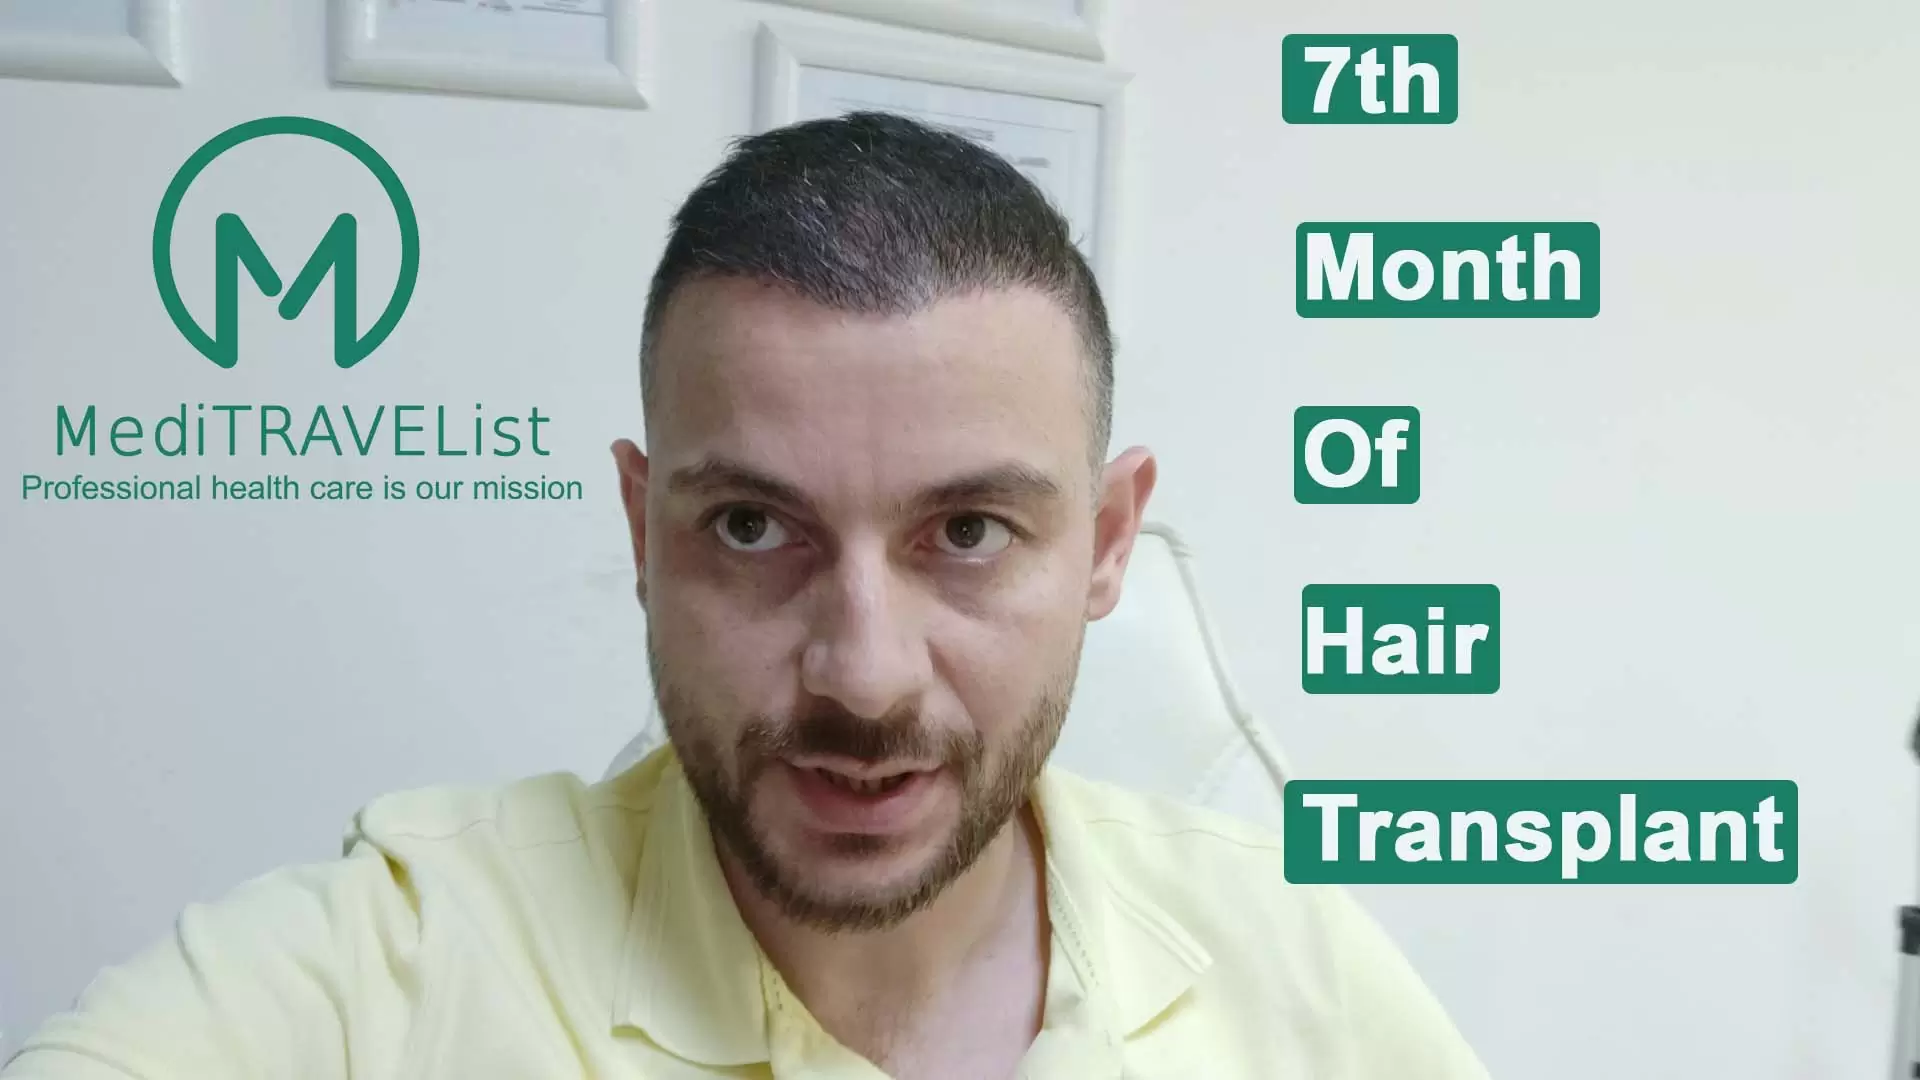 7 th month of Hair transplantation video cover image